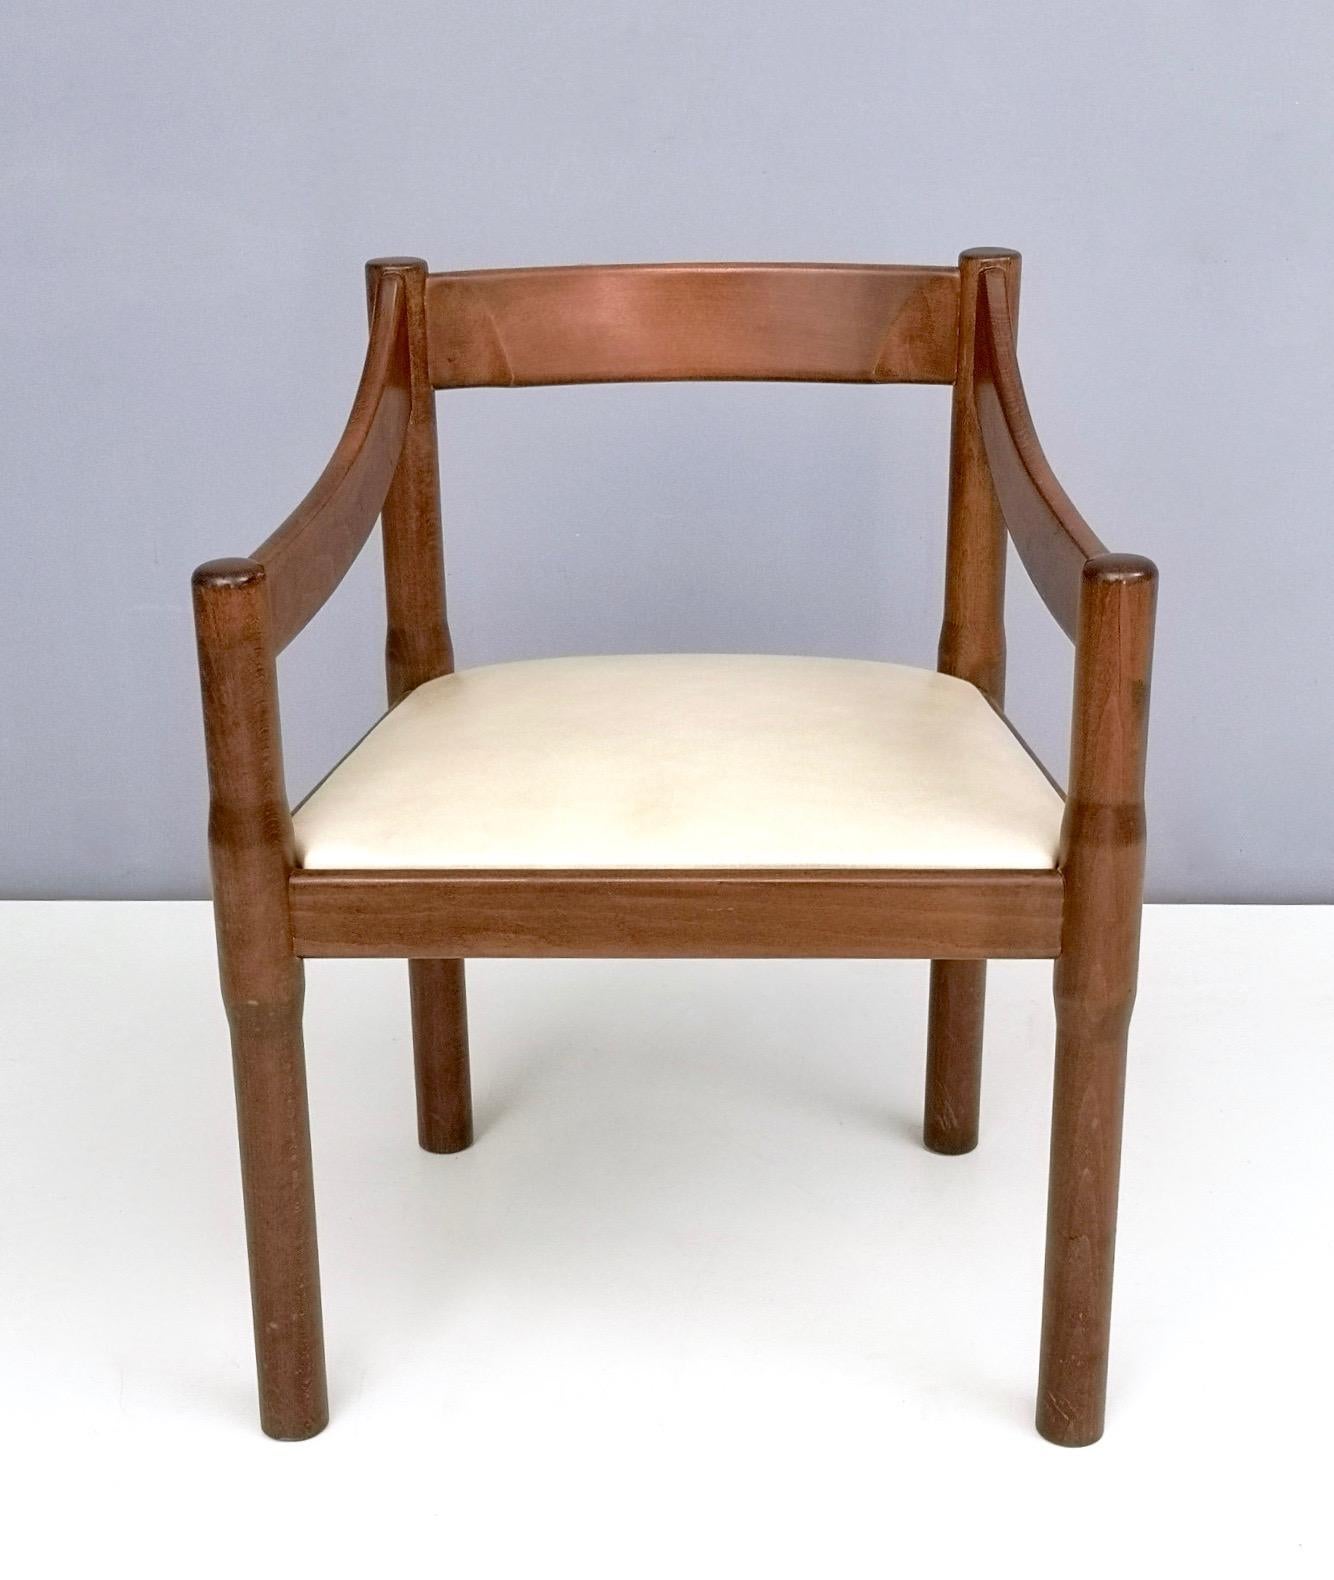 Mid-Century Modern 'Carimate' Walnut and Ivory Skai Chair by Vico Magistretti for Cassina, 1960s